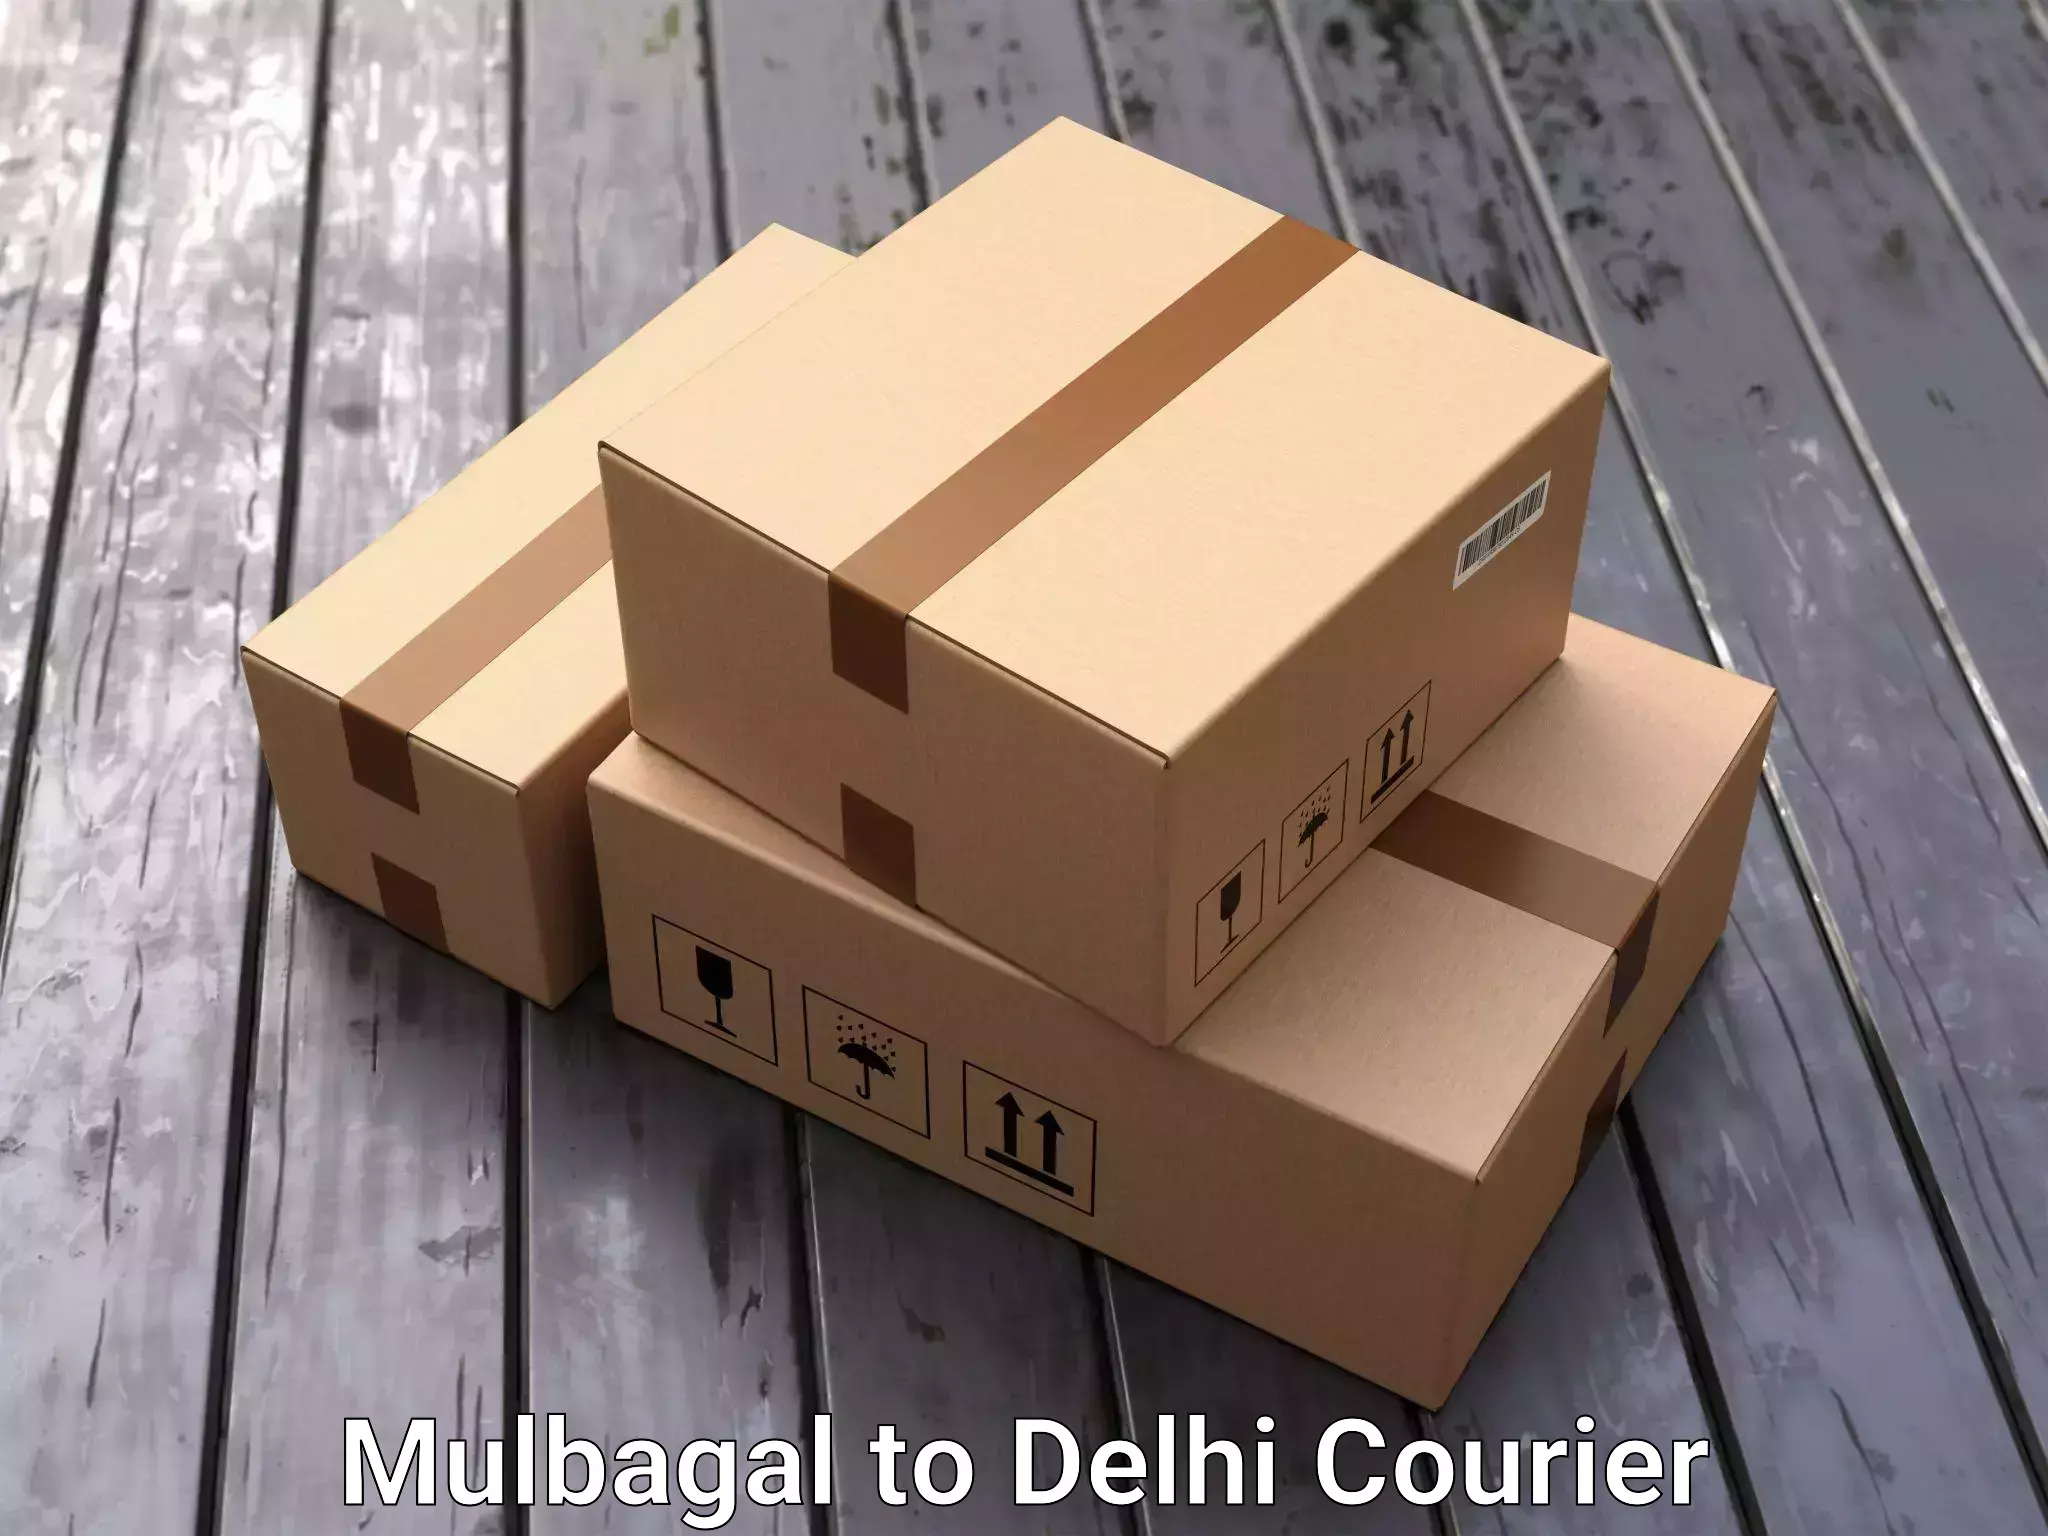 Trusted moving company Mulbagal to Lodhi Road